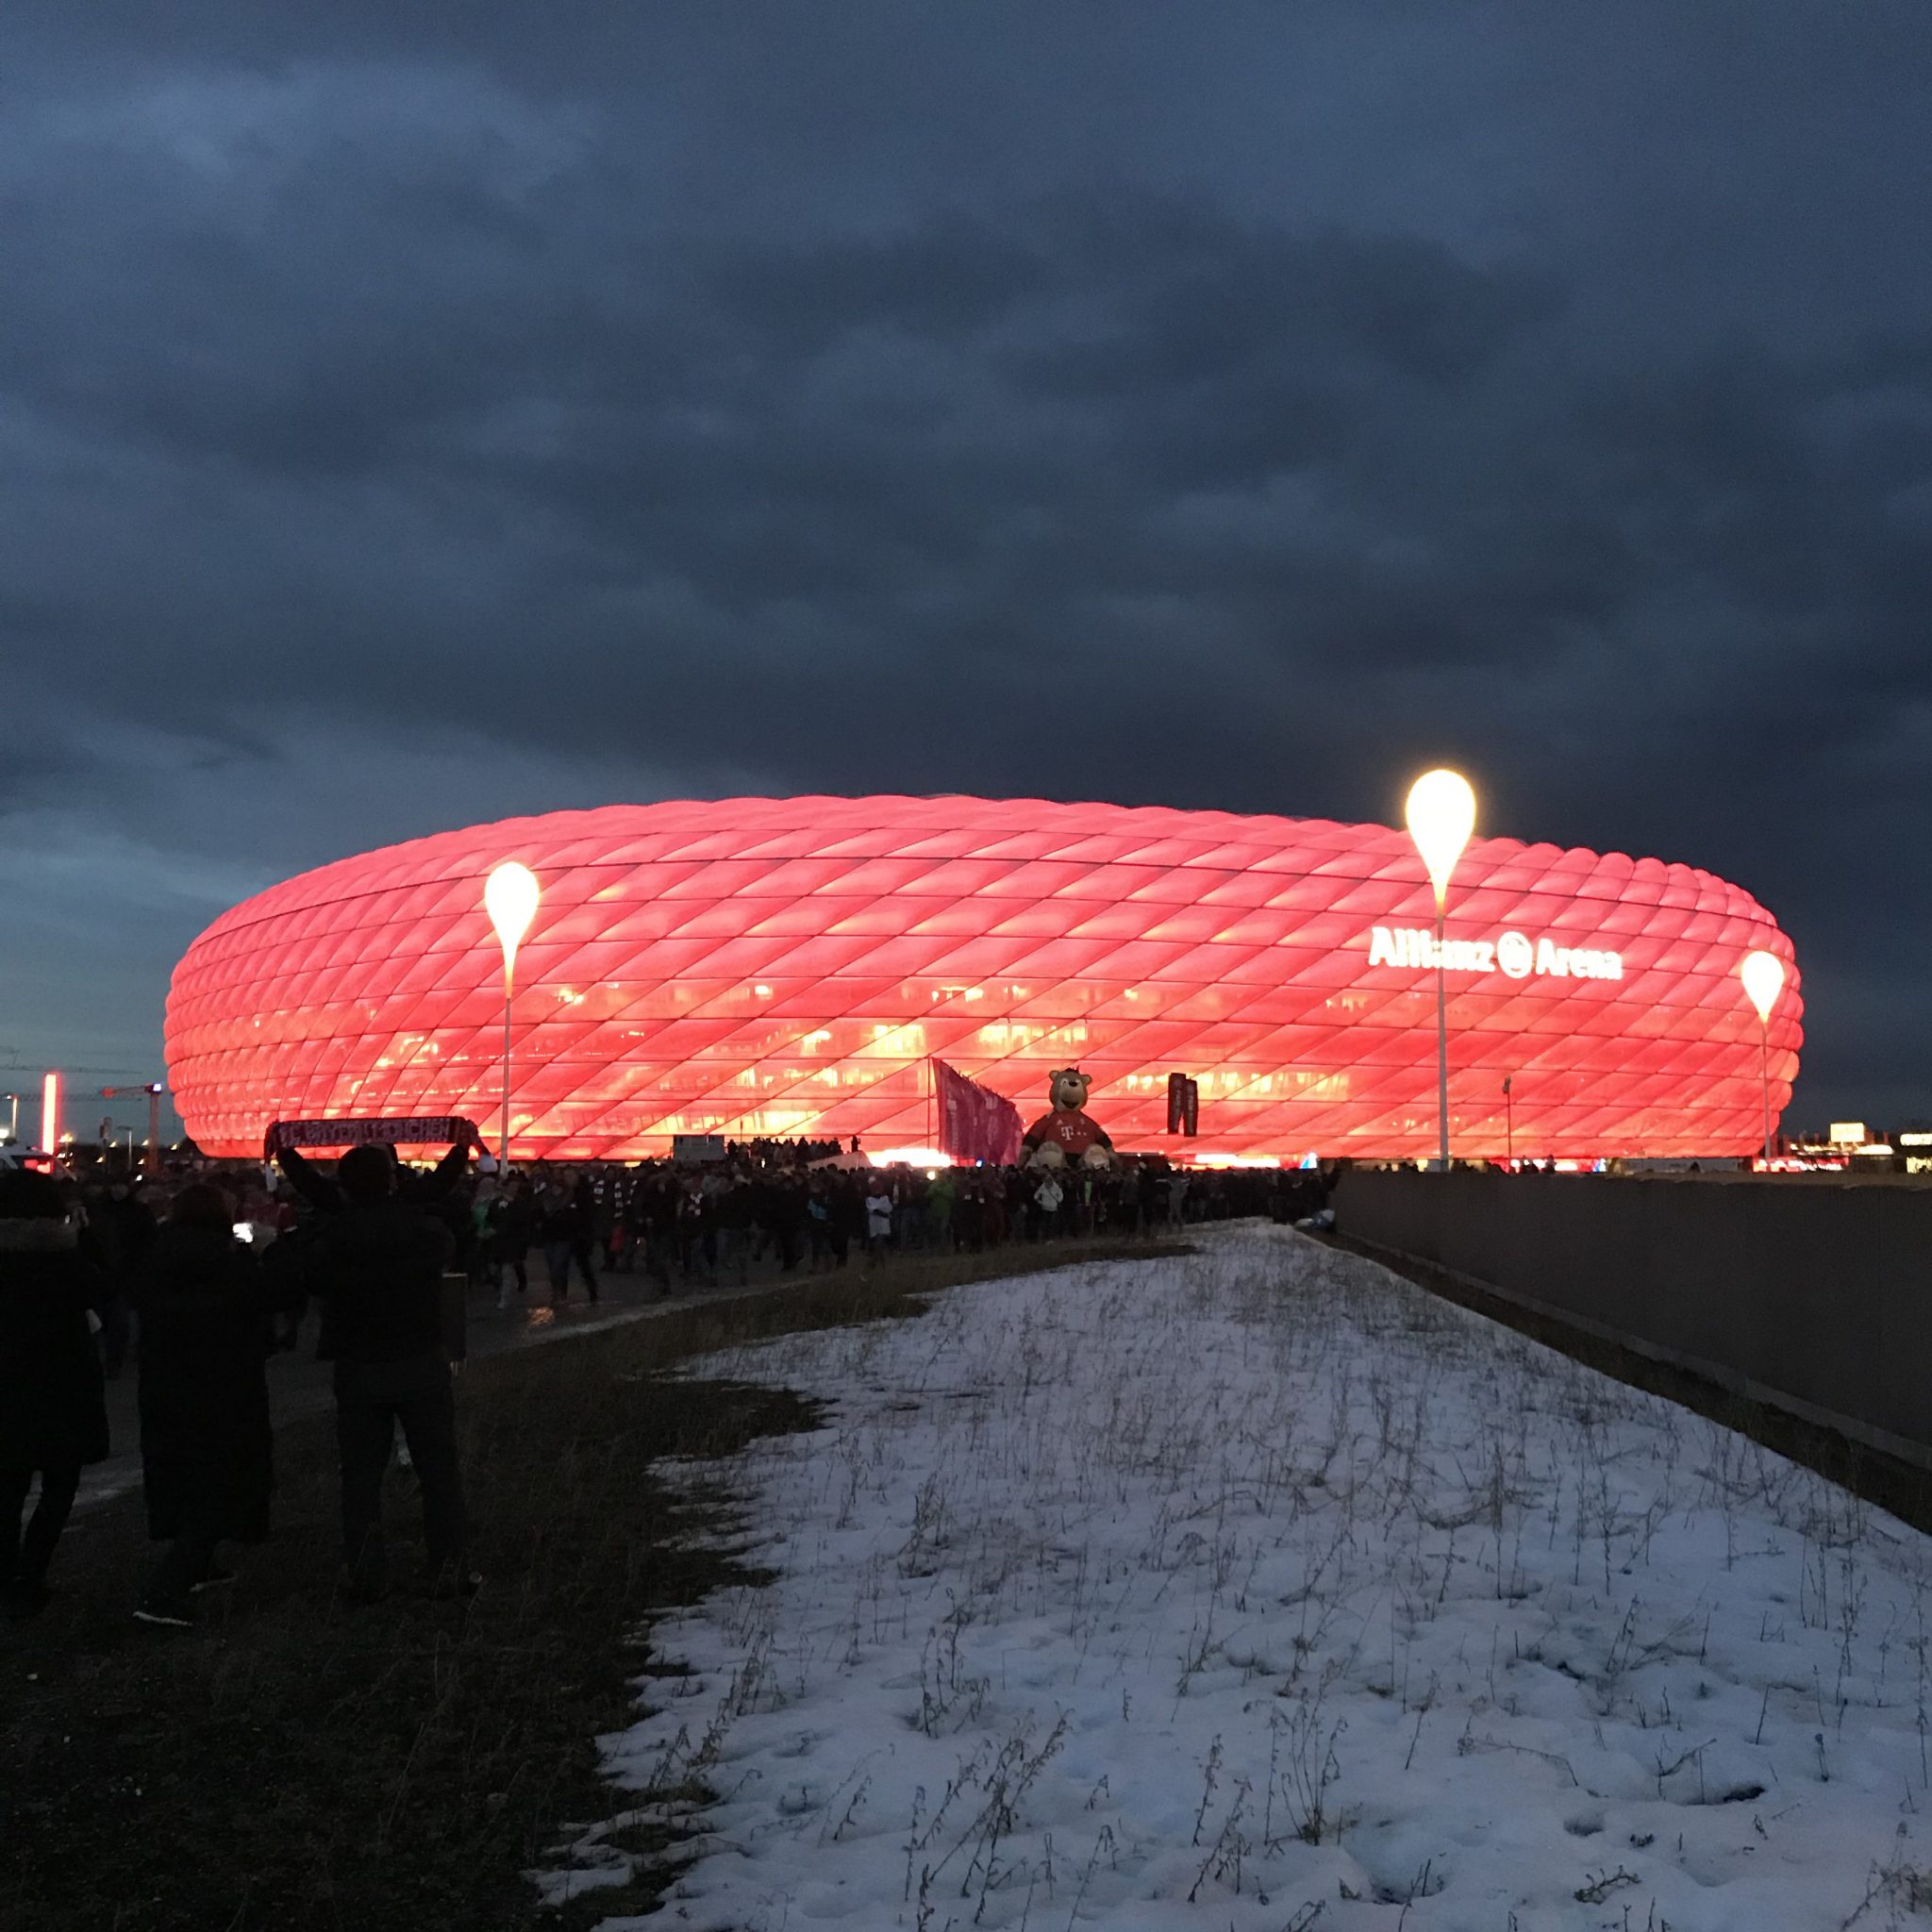 allianz arena in munich germany at night all lit up